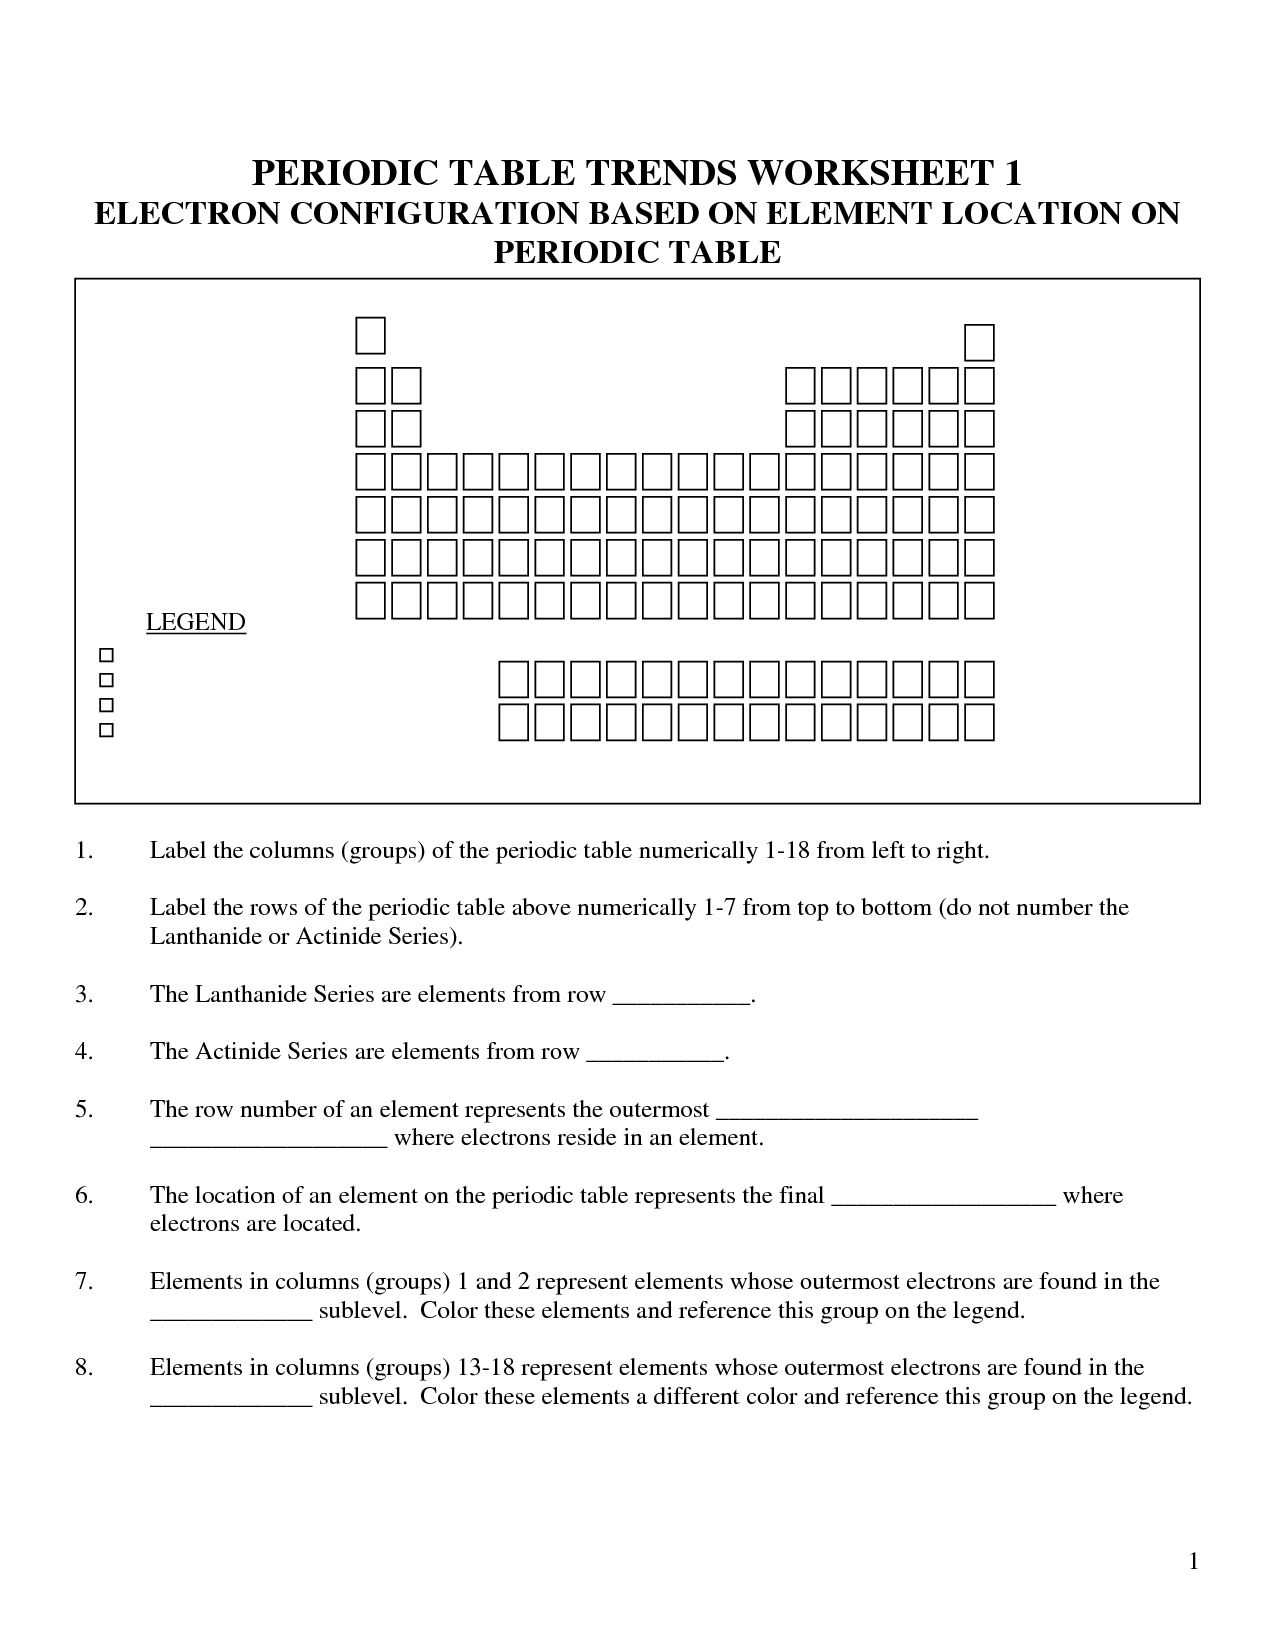 Atomic Structure Periodic Trends Worksheet Answers